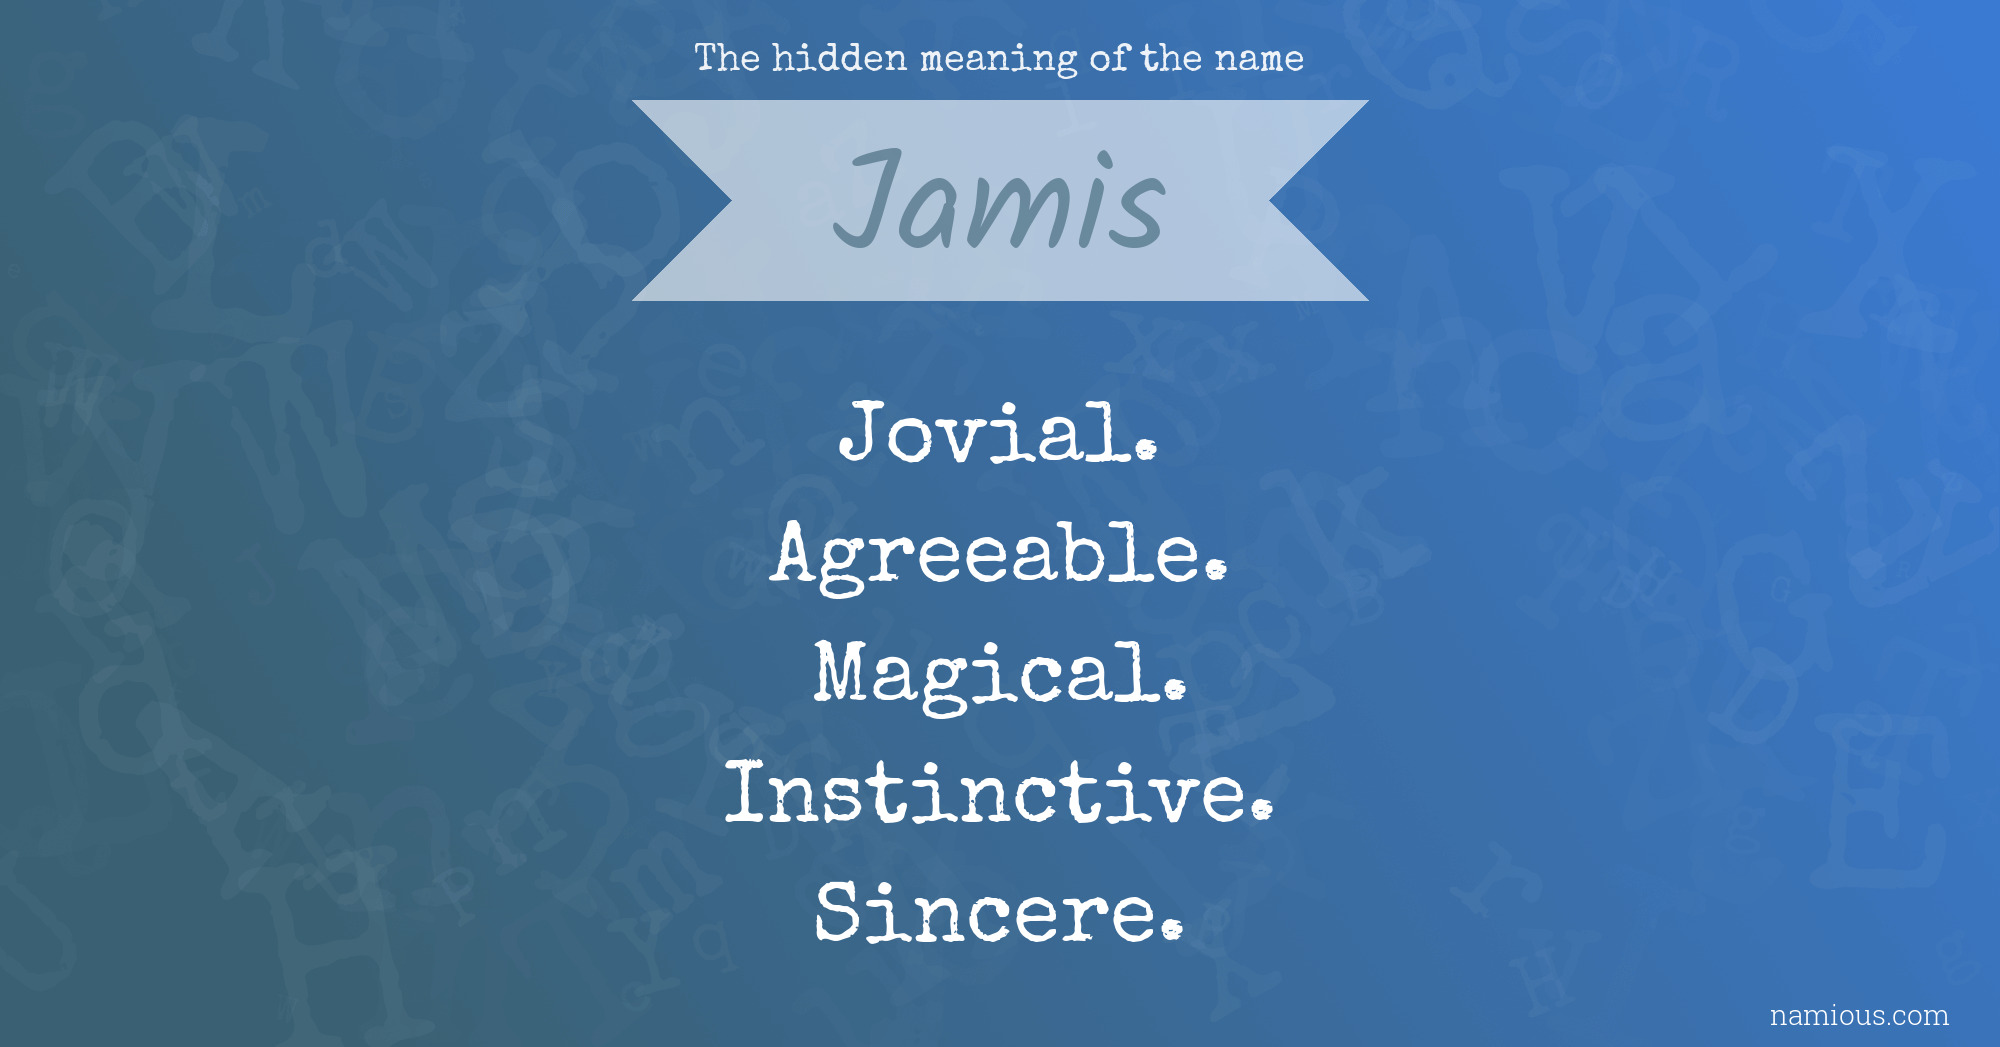 The hidden meaning of the name Jamis